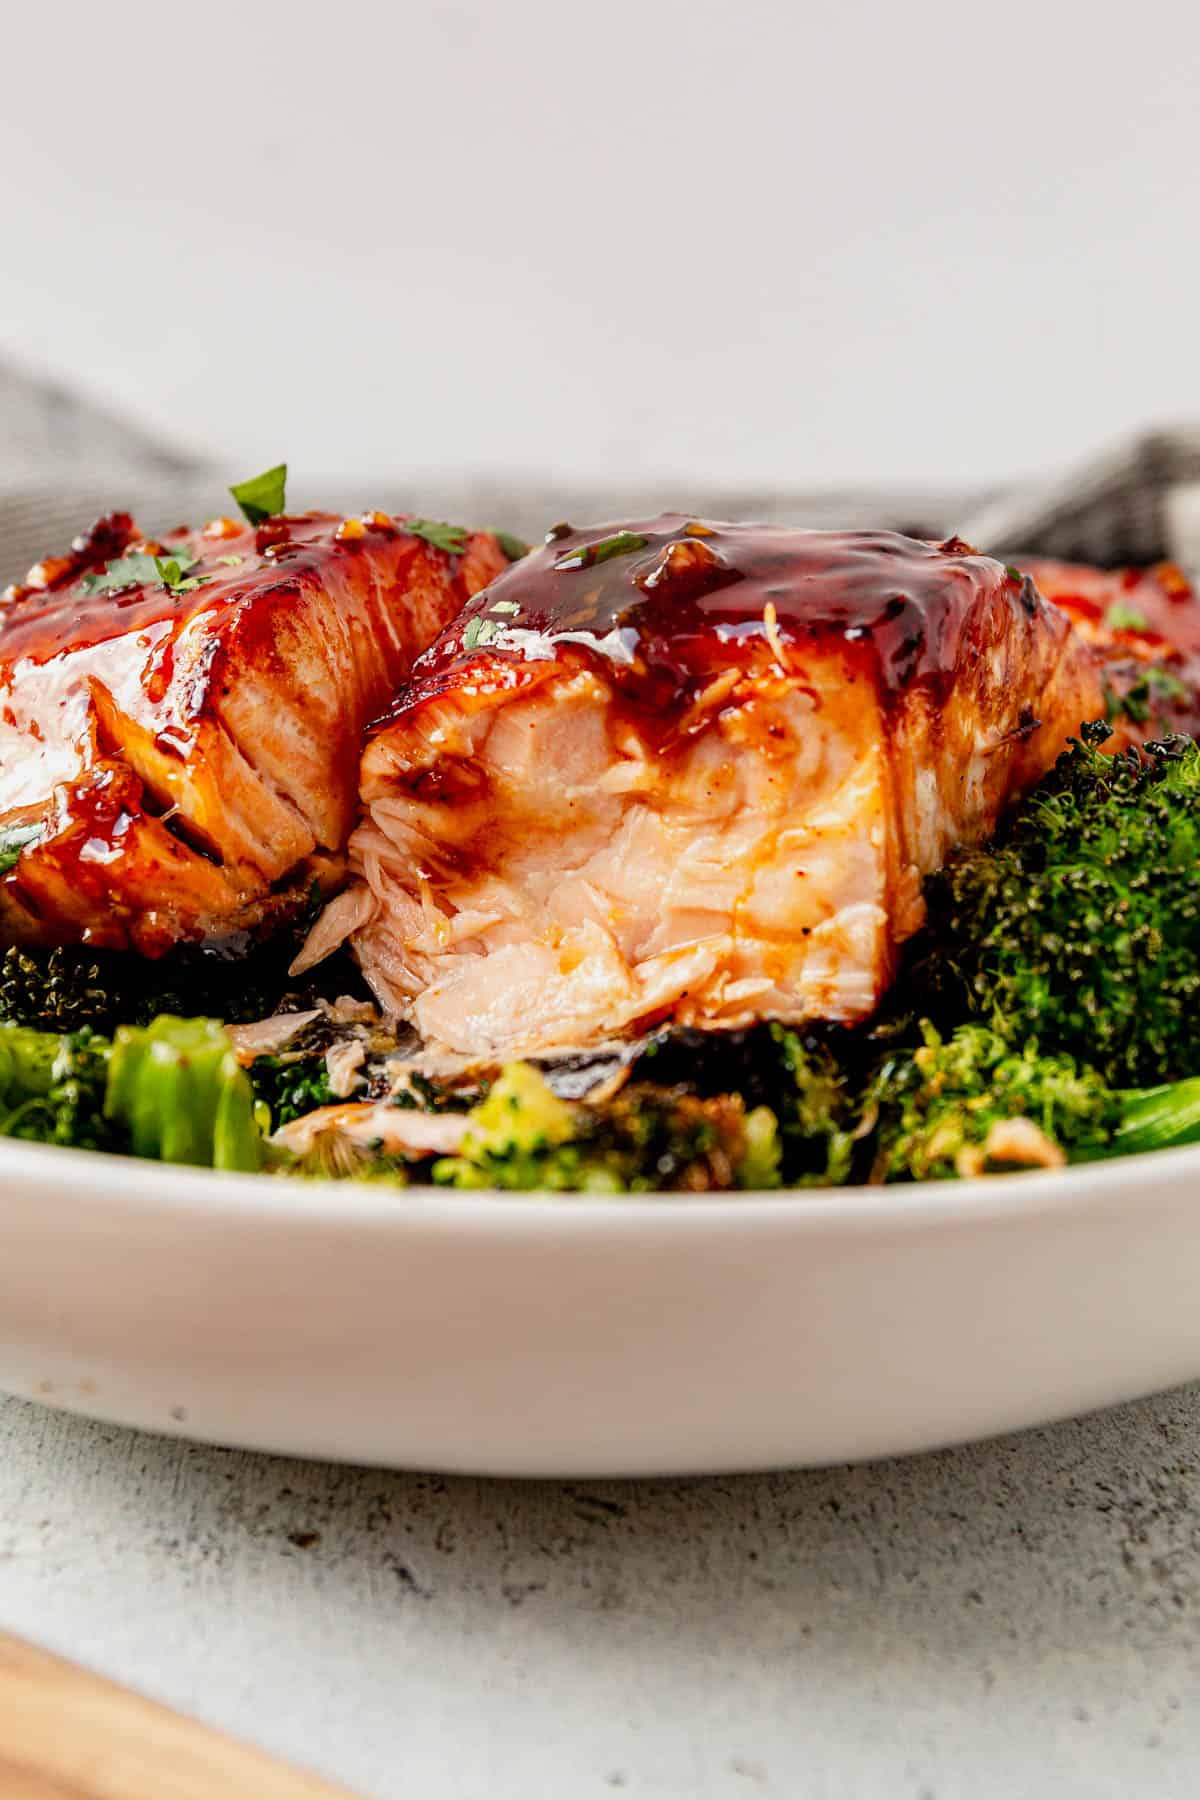 two pieces of honey glazed salmon on a bed of broccoli